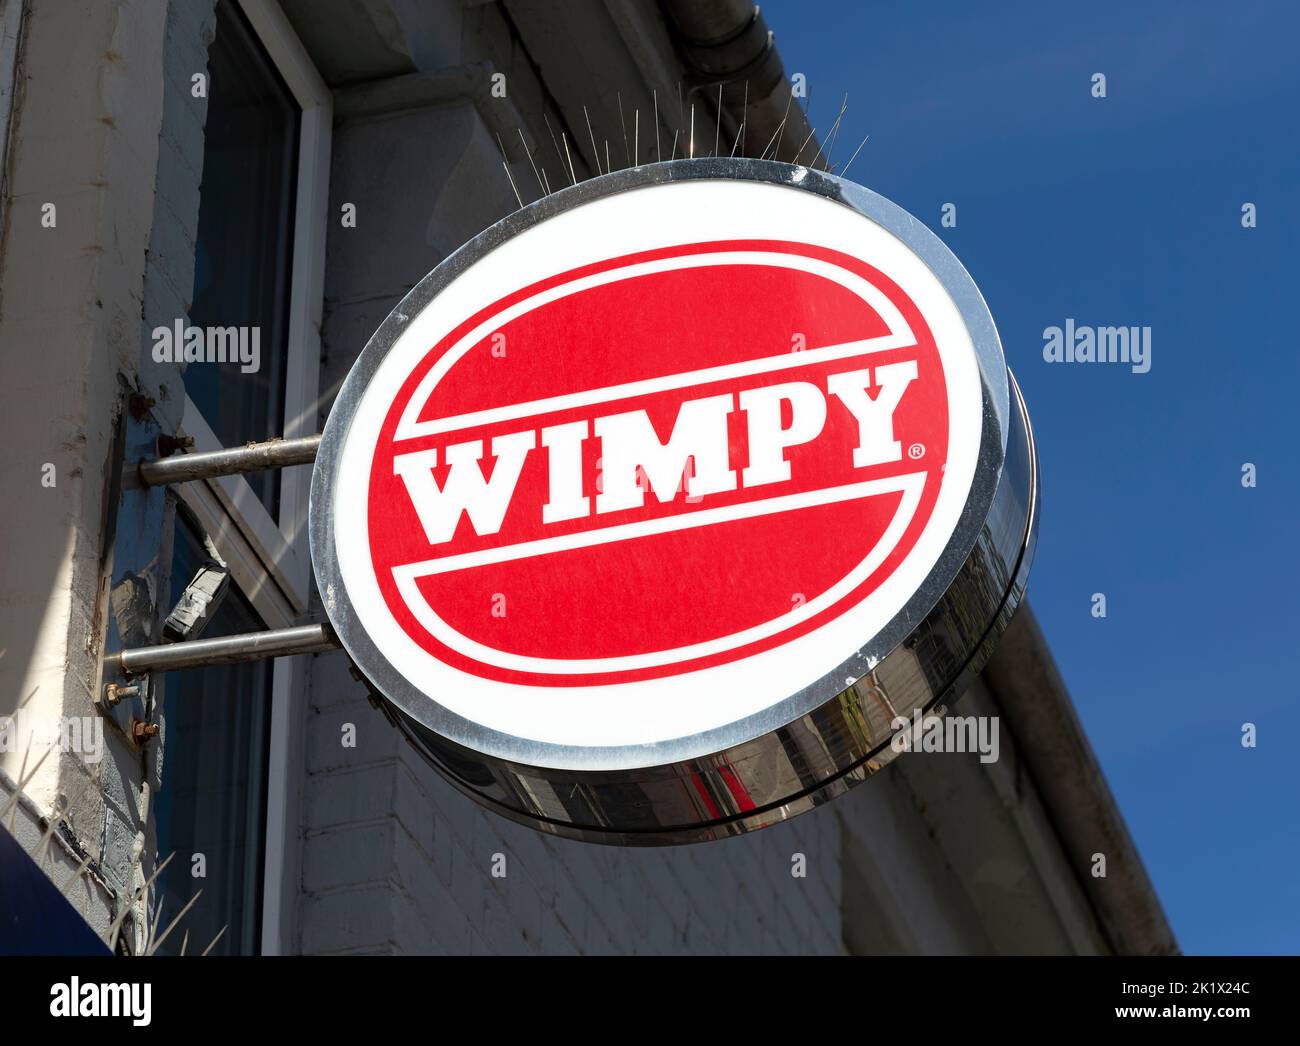 Enseigne Wimpy fast food Burger Restaurant, Felixstowe, Suffolk, Angleterre, Royaume-Uni Banque D'Images